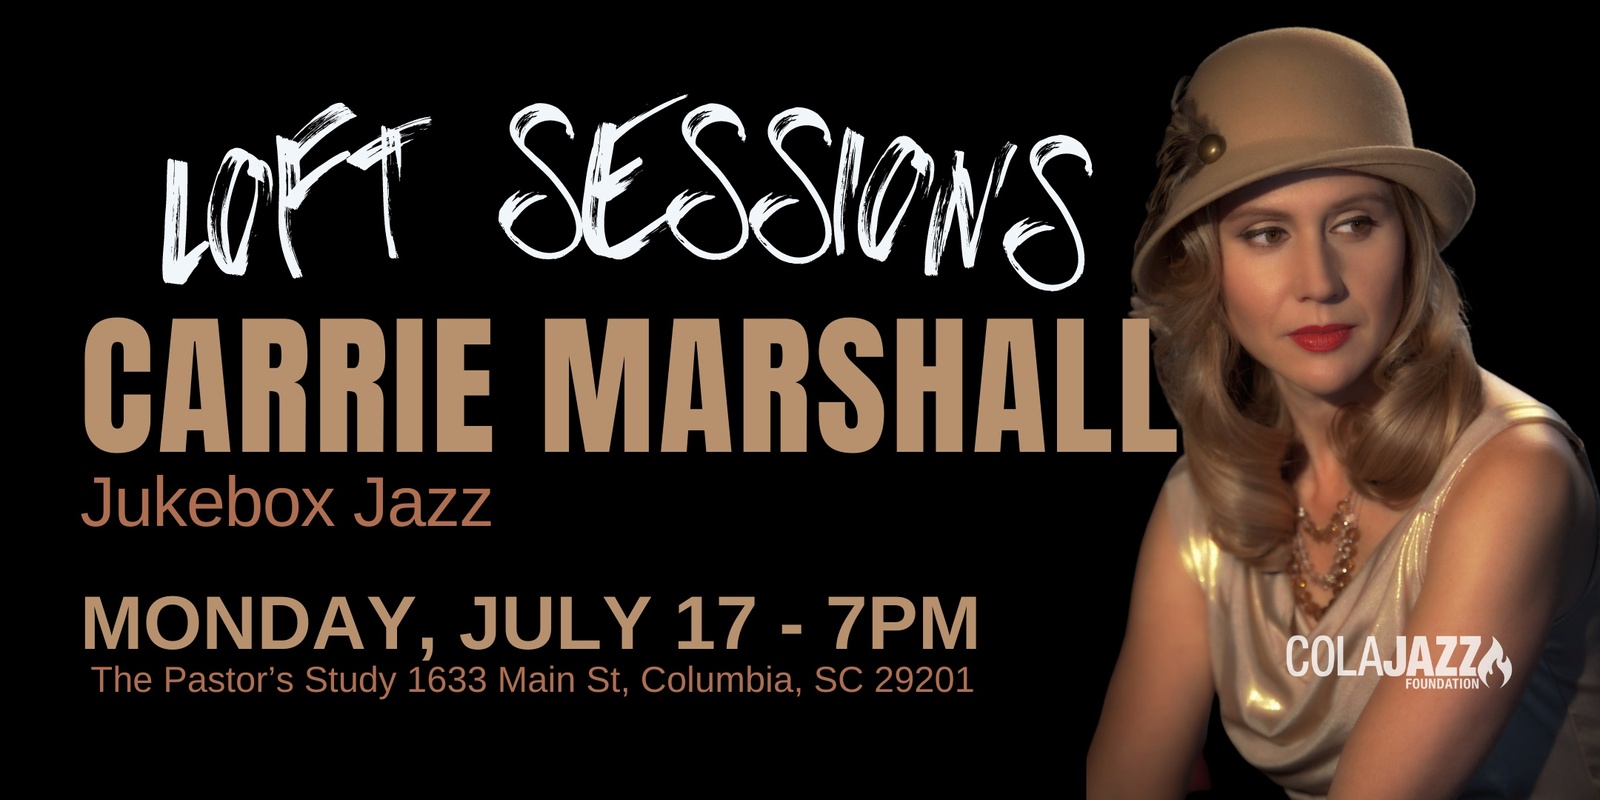 Banner image for July 17 Loft Session: Carrie Marshall